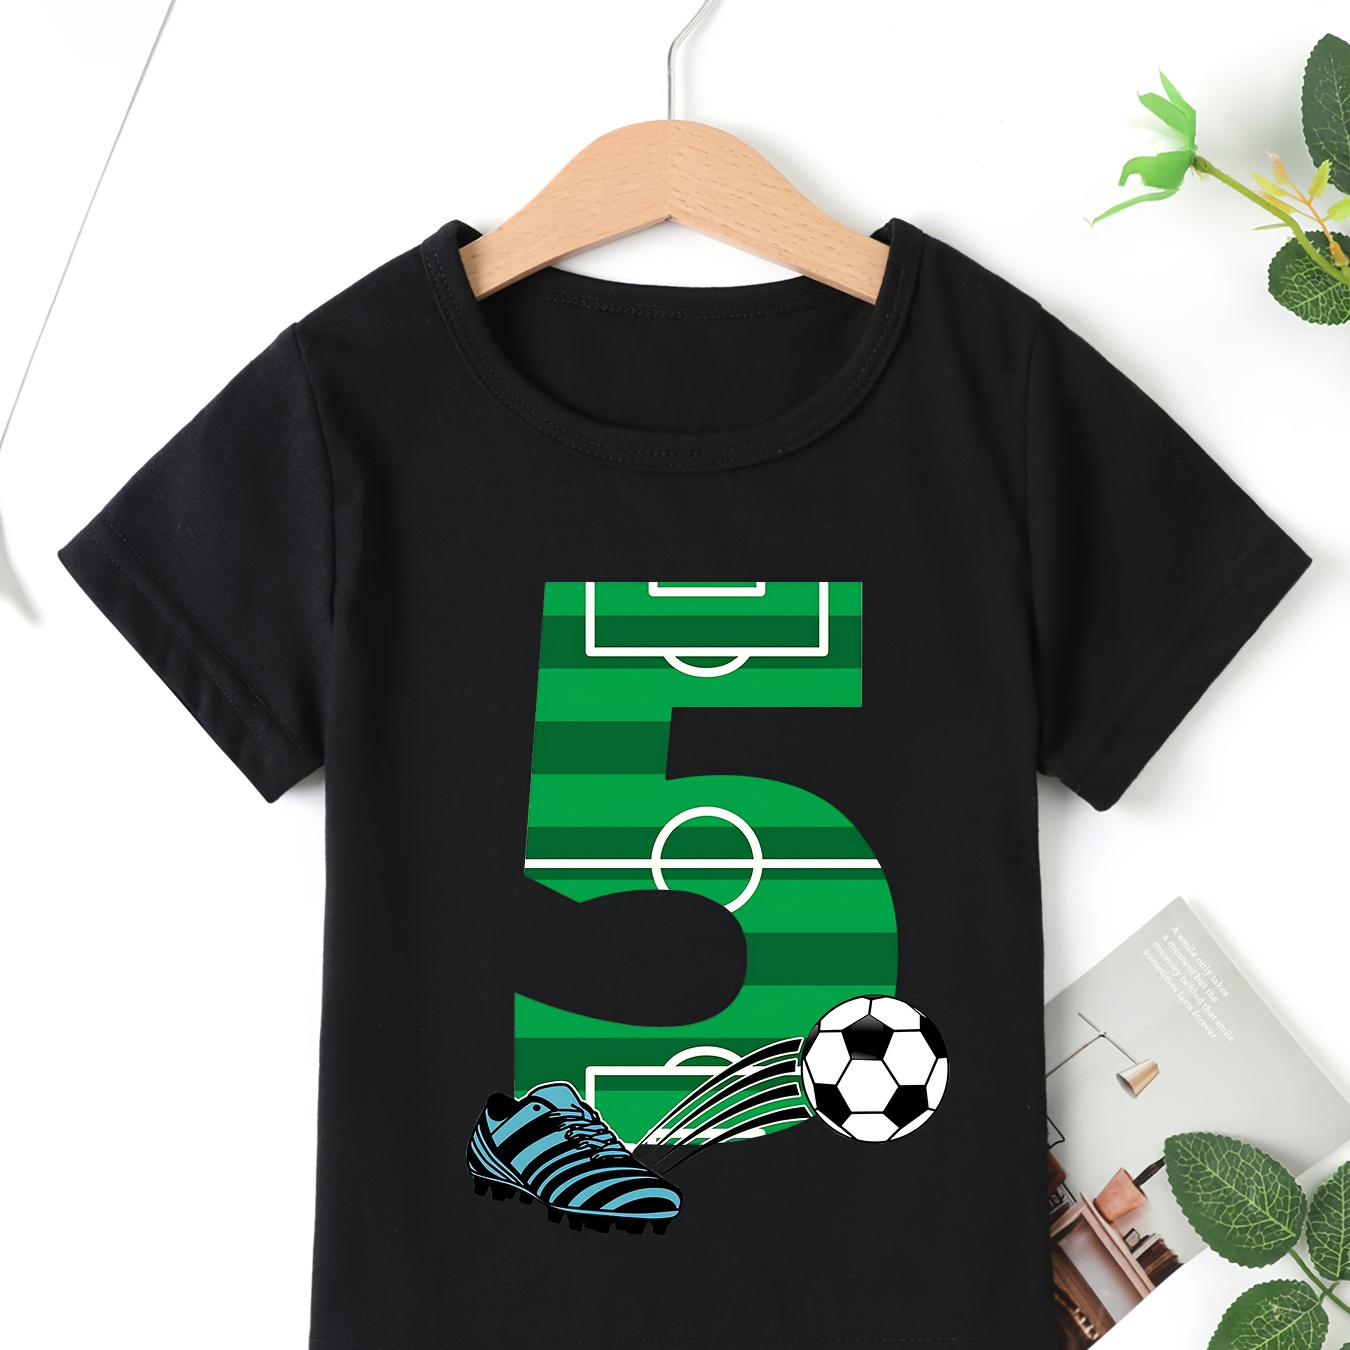 

Soccer & Number 5 Print Casual Short Sleeve T-shirt For Boys, Cool Comfy Lightweight Versatile Tee Top, Boys Summer Outfits Clothes